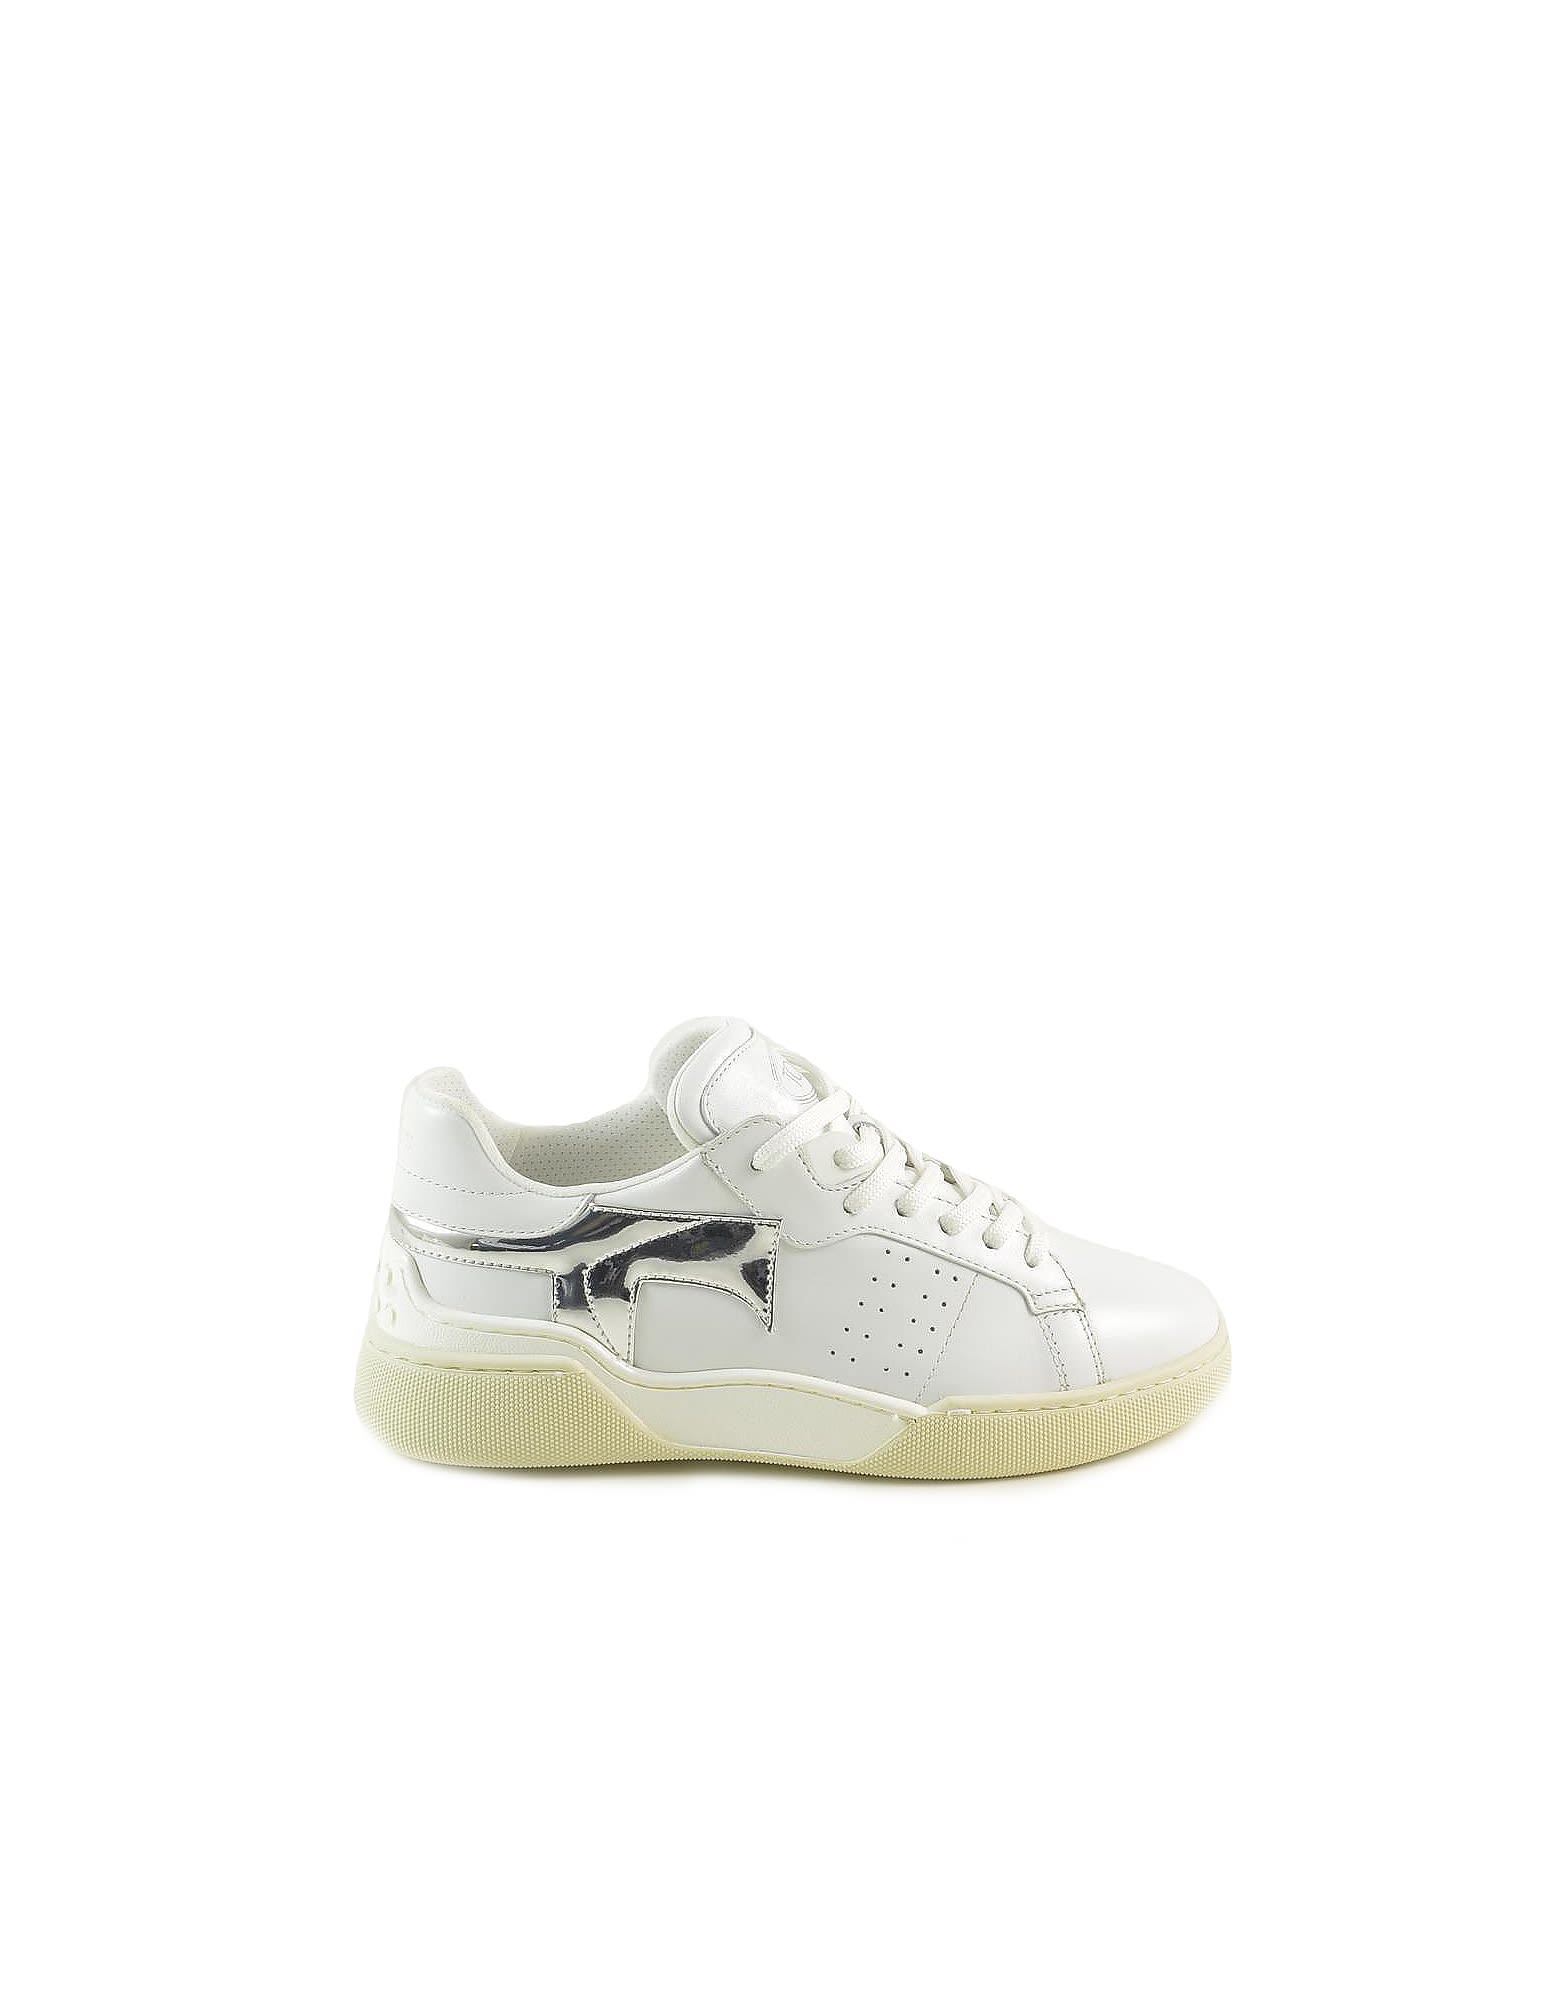 Tods White/silver Leather Womens Sneakers